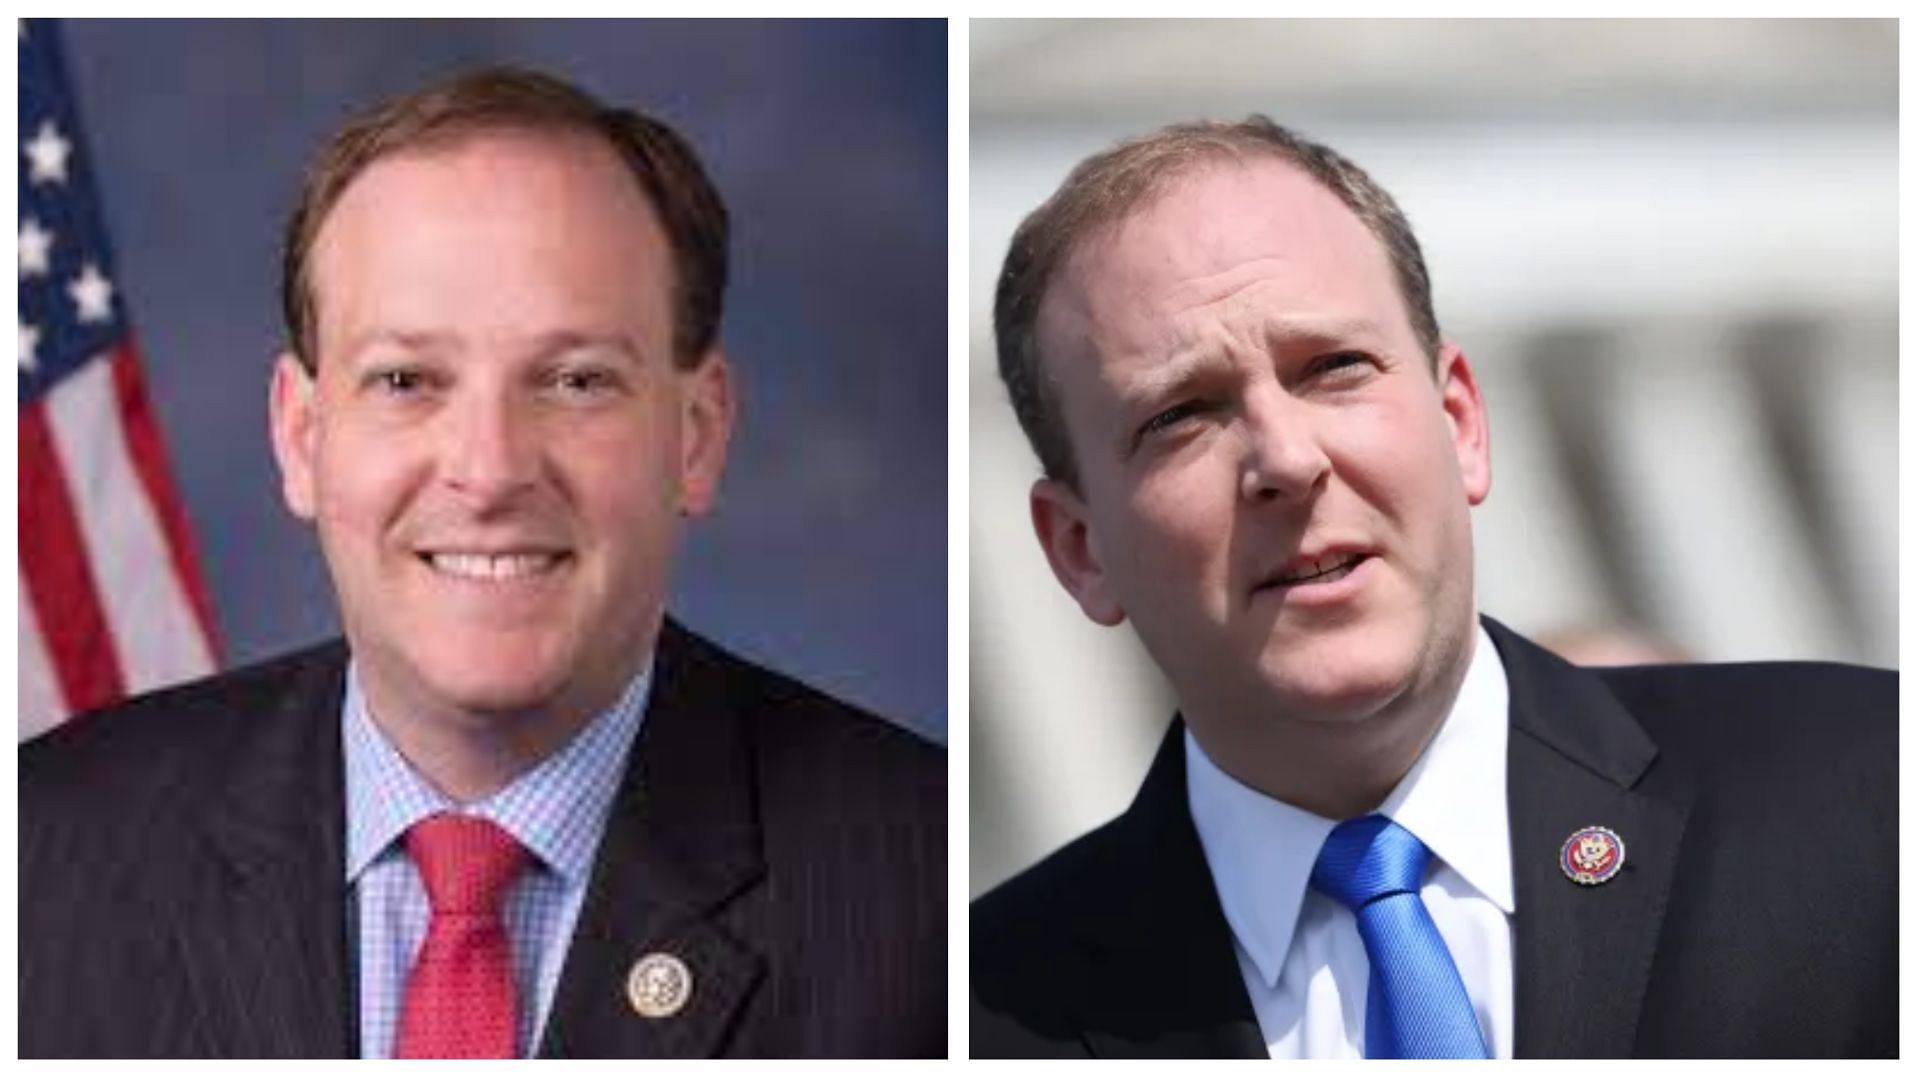 Zeldin was assaulted by a man armed with a knife during a campaign rally (images via Kevin Dietsch/Getty and Lee Zeldin/Facebook